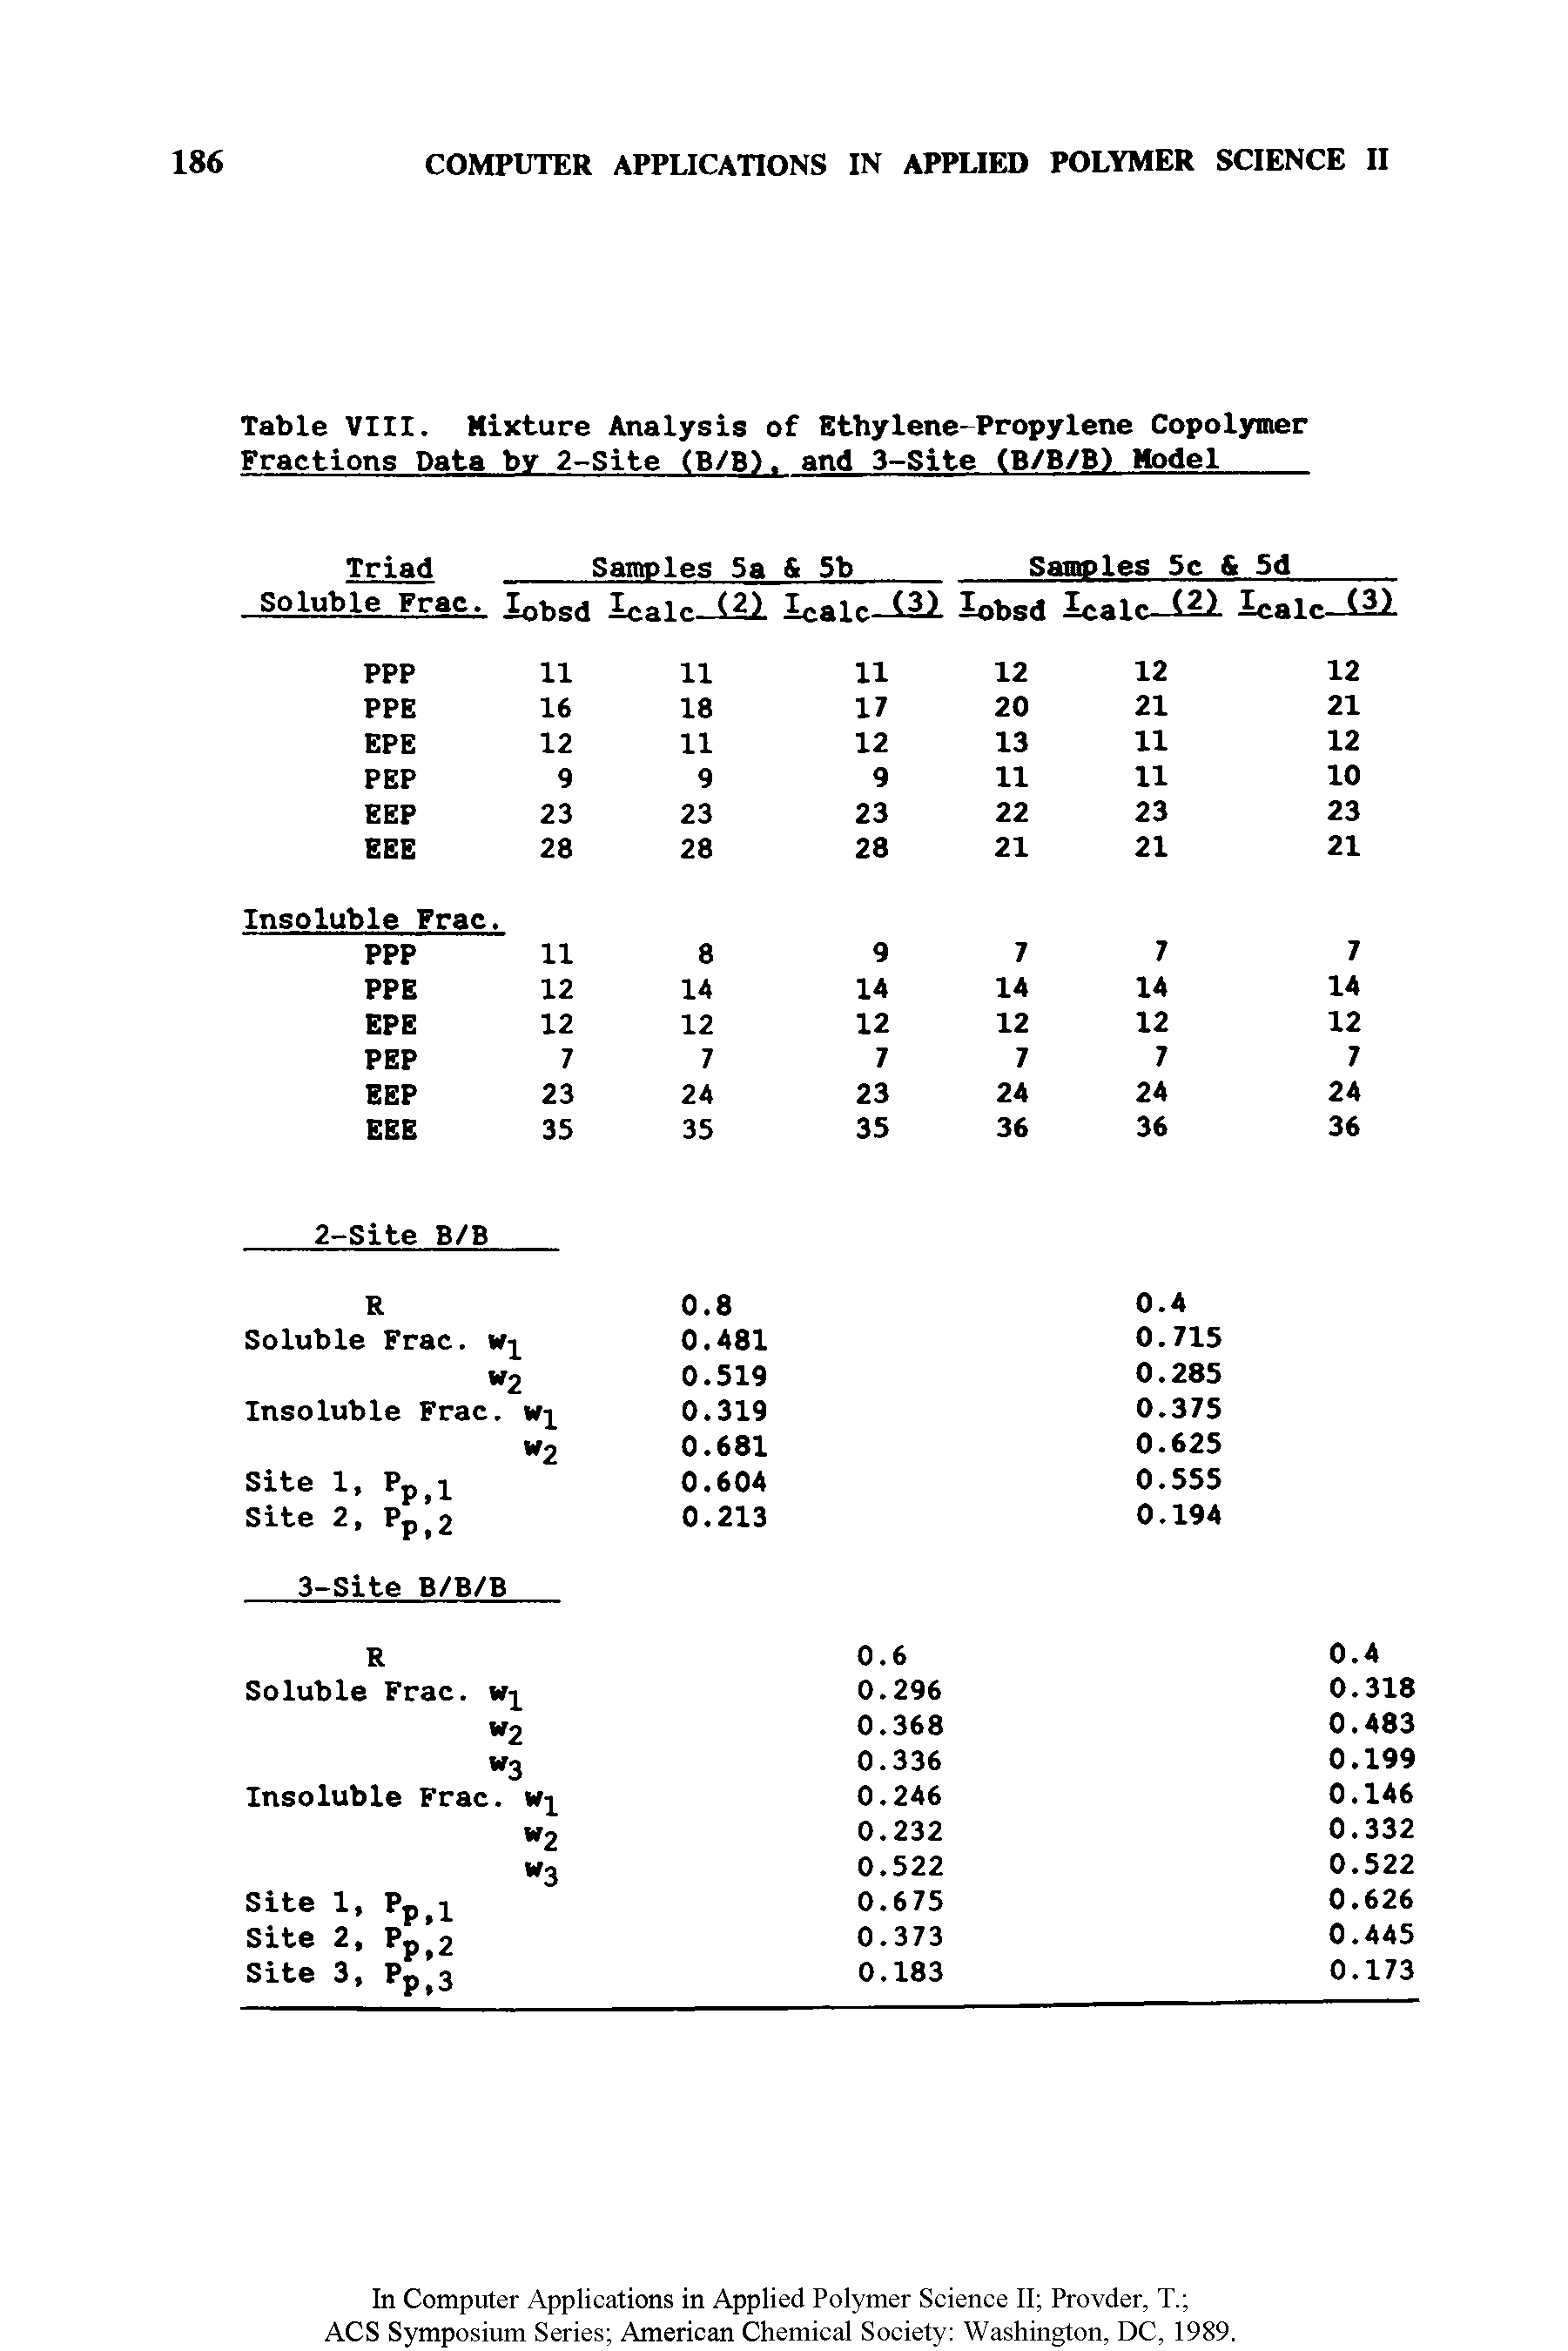 Table VIII. Mixture Analysis of Ethylene-Propylene Copolymer Fractions Data by 2-Site (B/B>. and 3-Site (B/B/B) Model ...